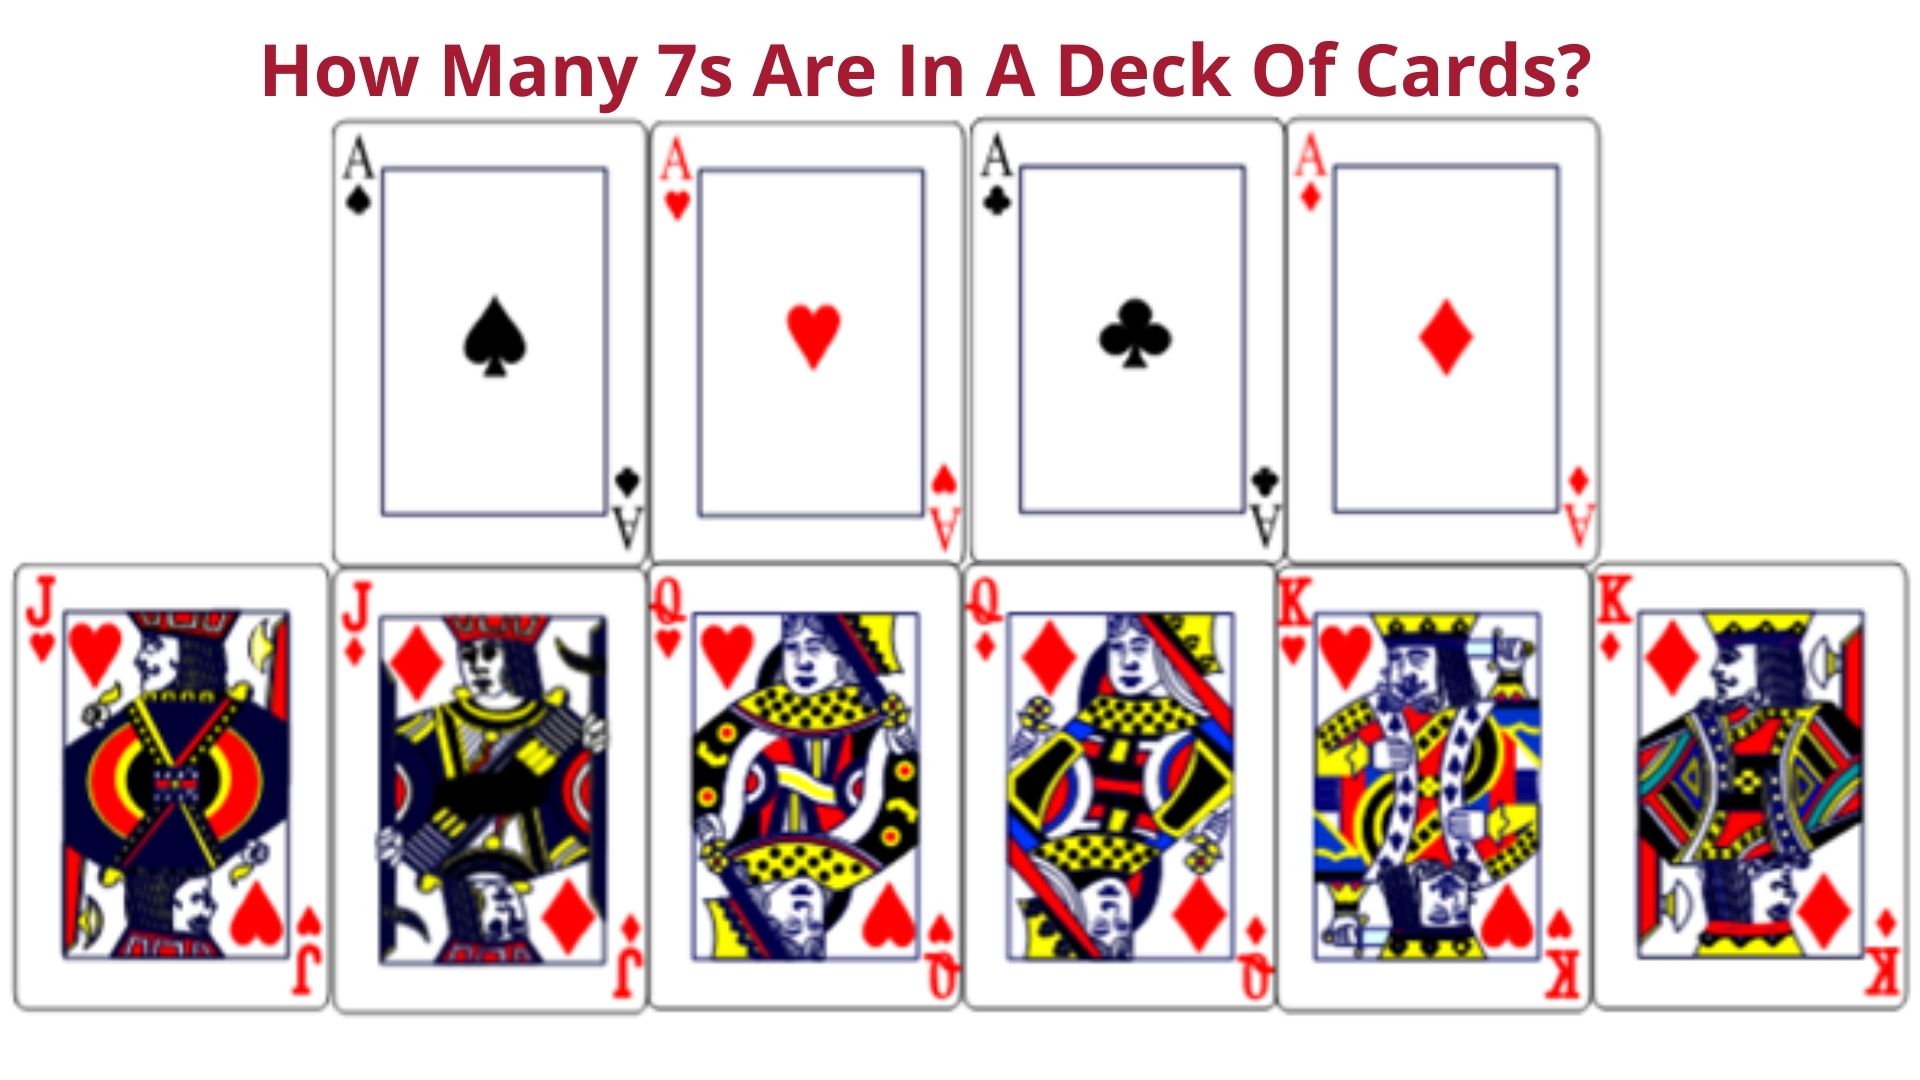 How Many 7s Are In A Deck Of Cards